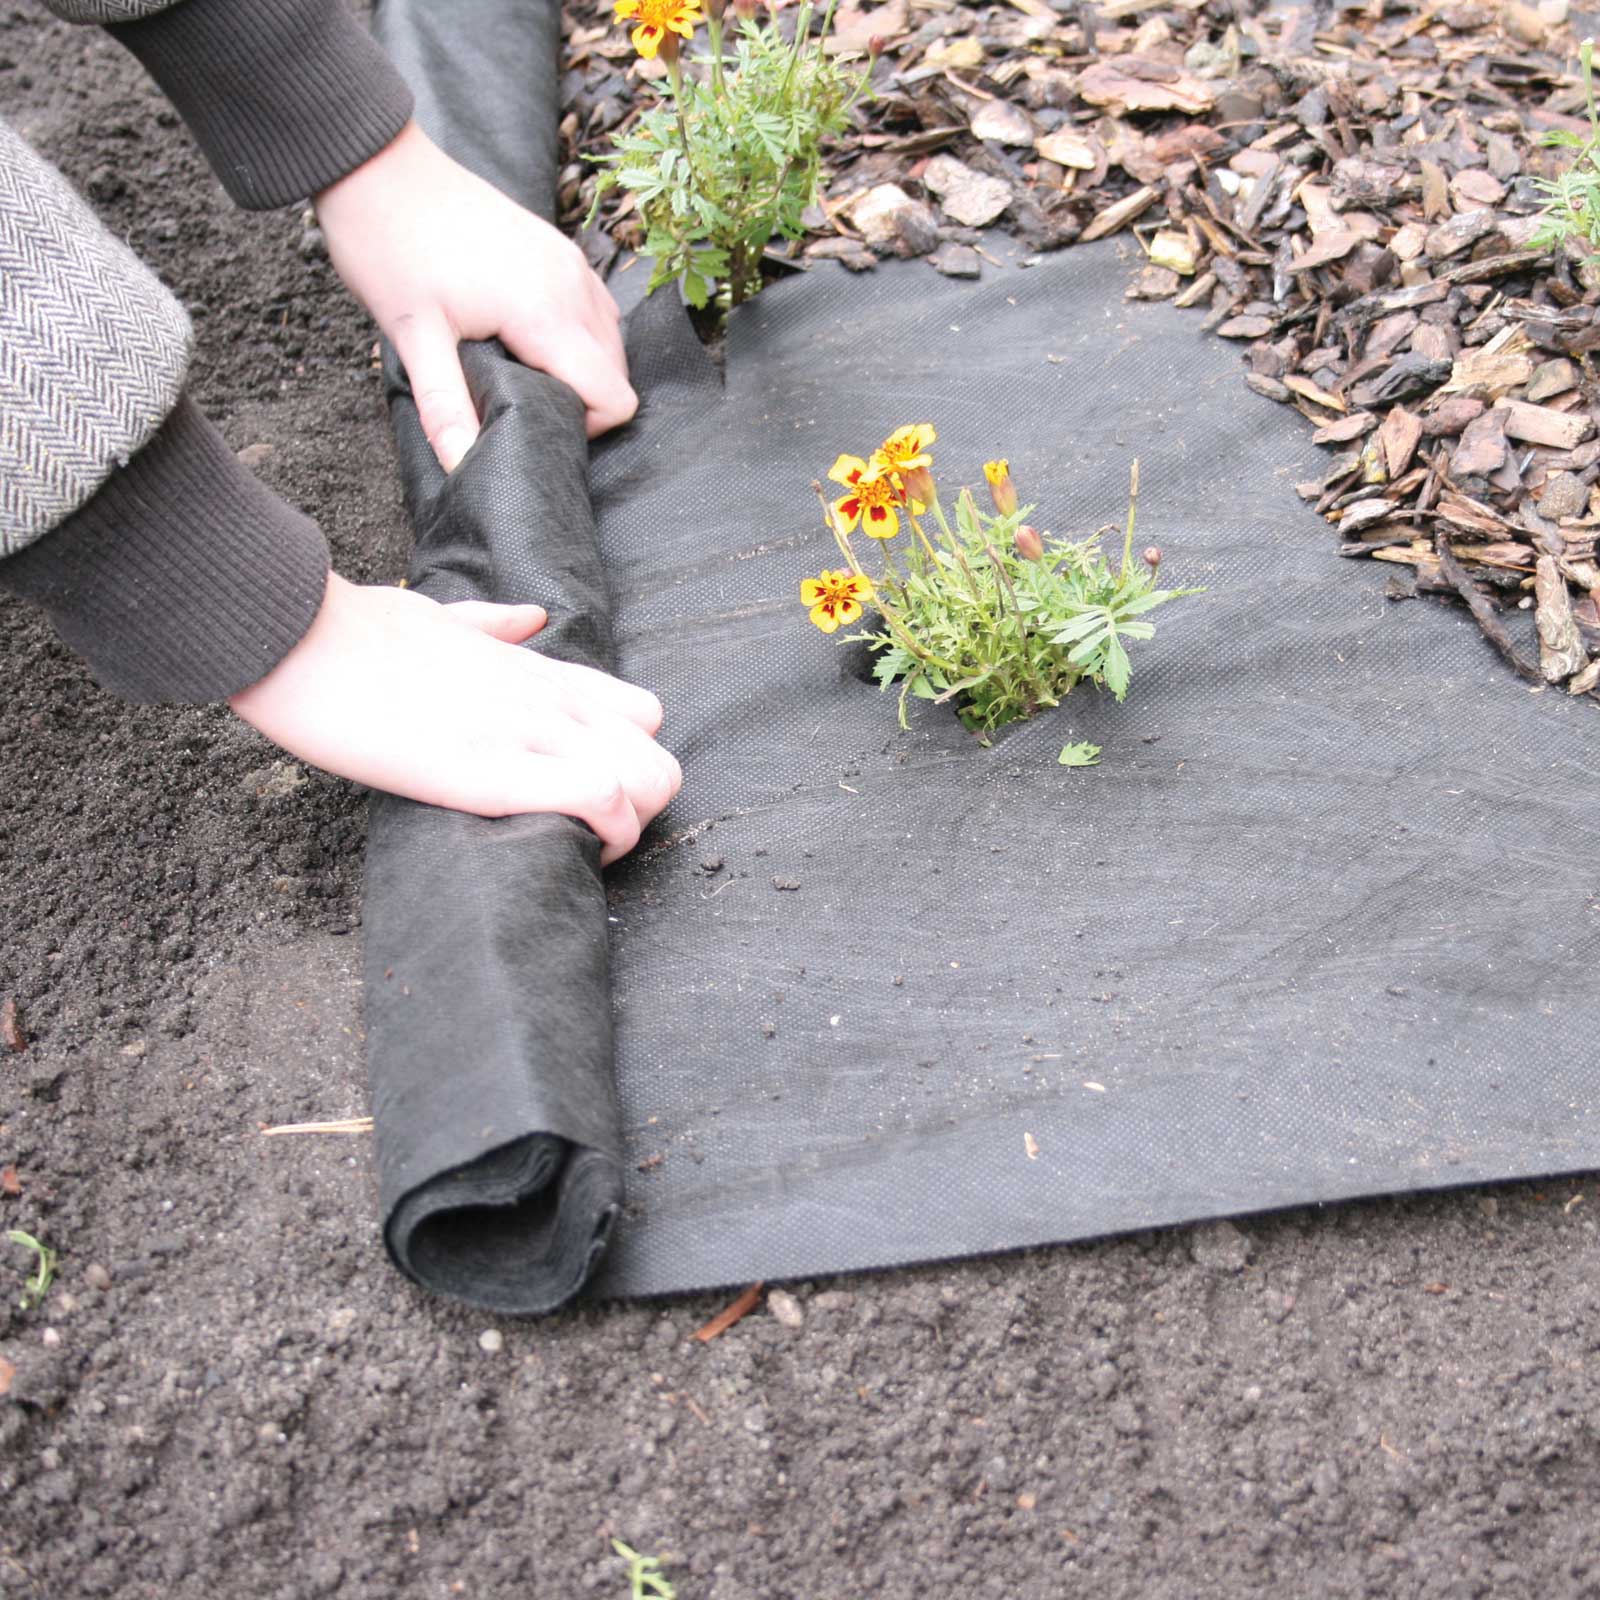 Ground Cover Fabric 50g Harrod, Ground Cover For Weed Control